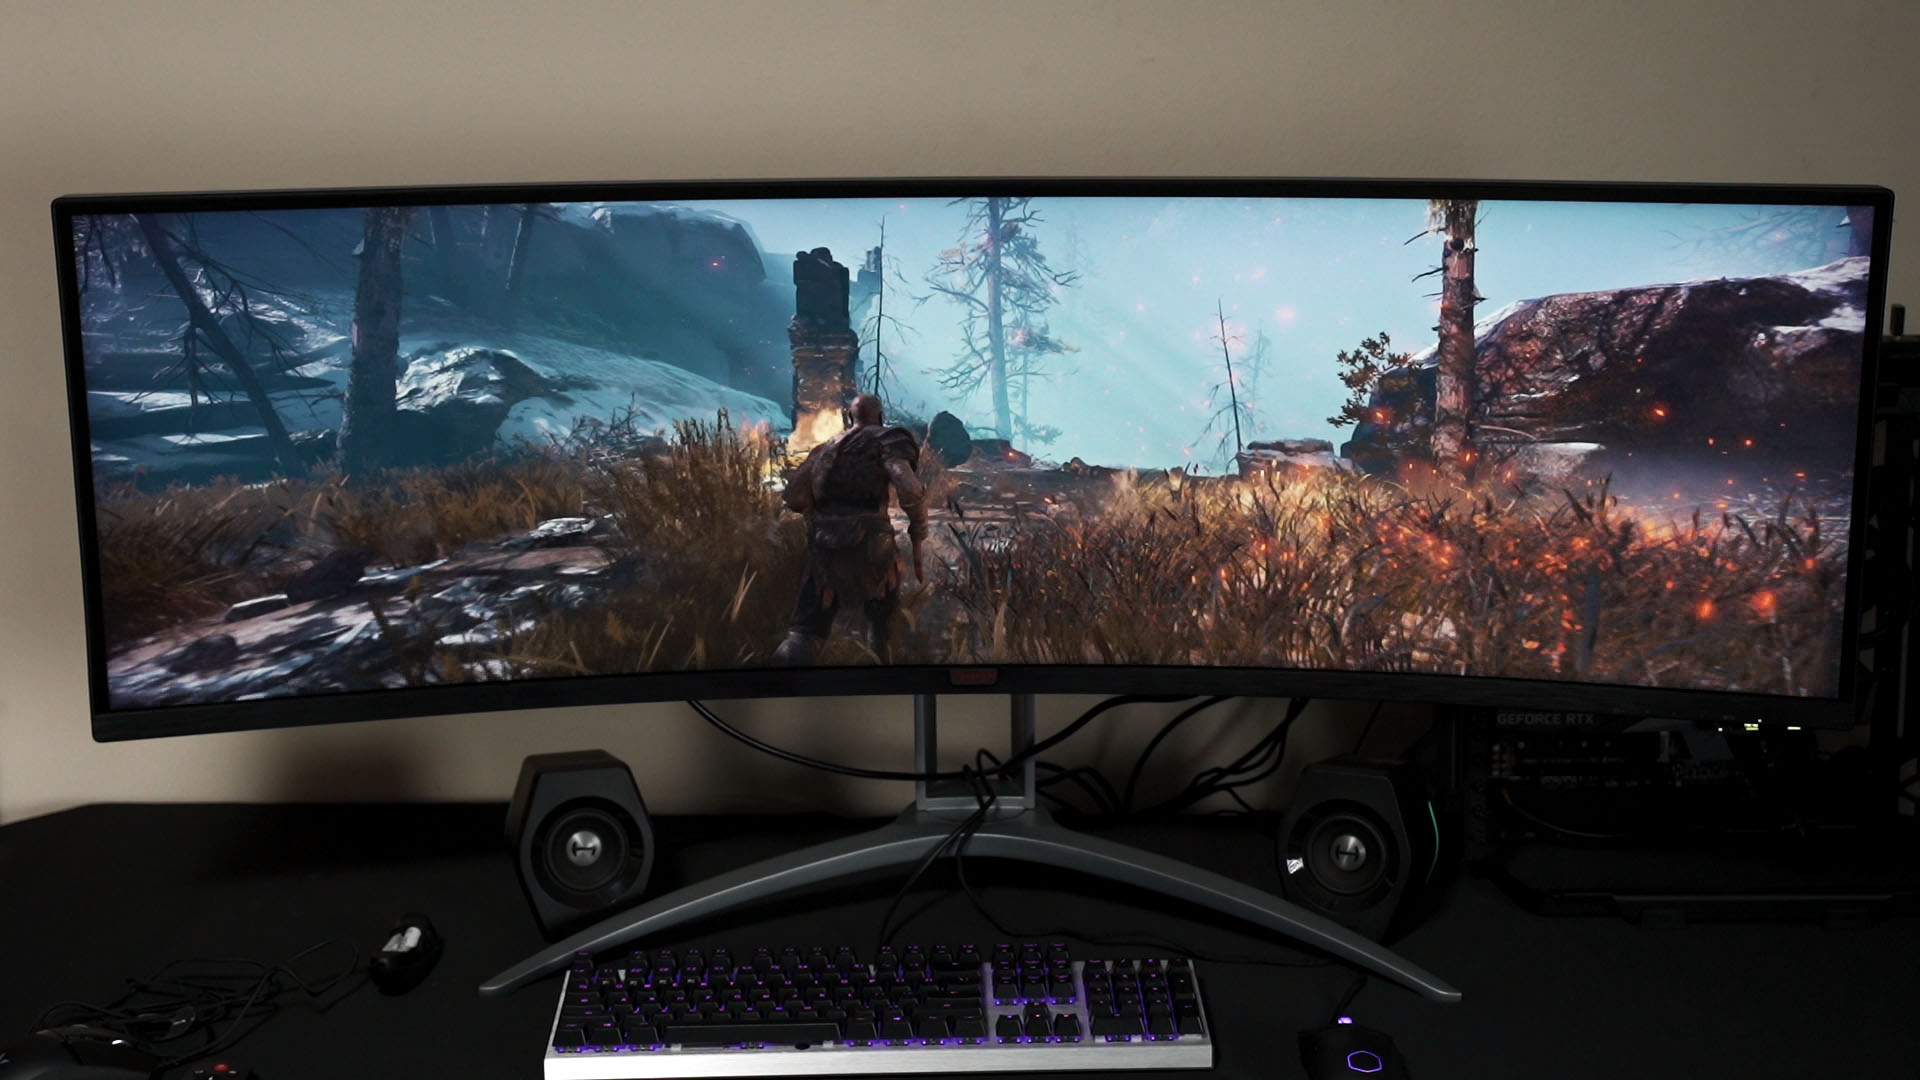 Caution: Before you buy an ultrawide or superwide monitor for gaming